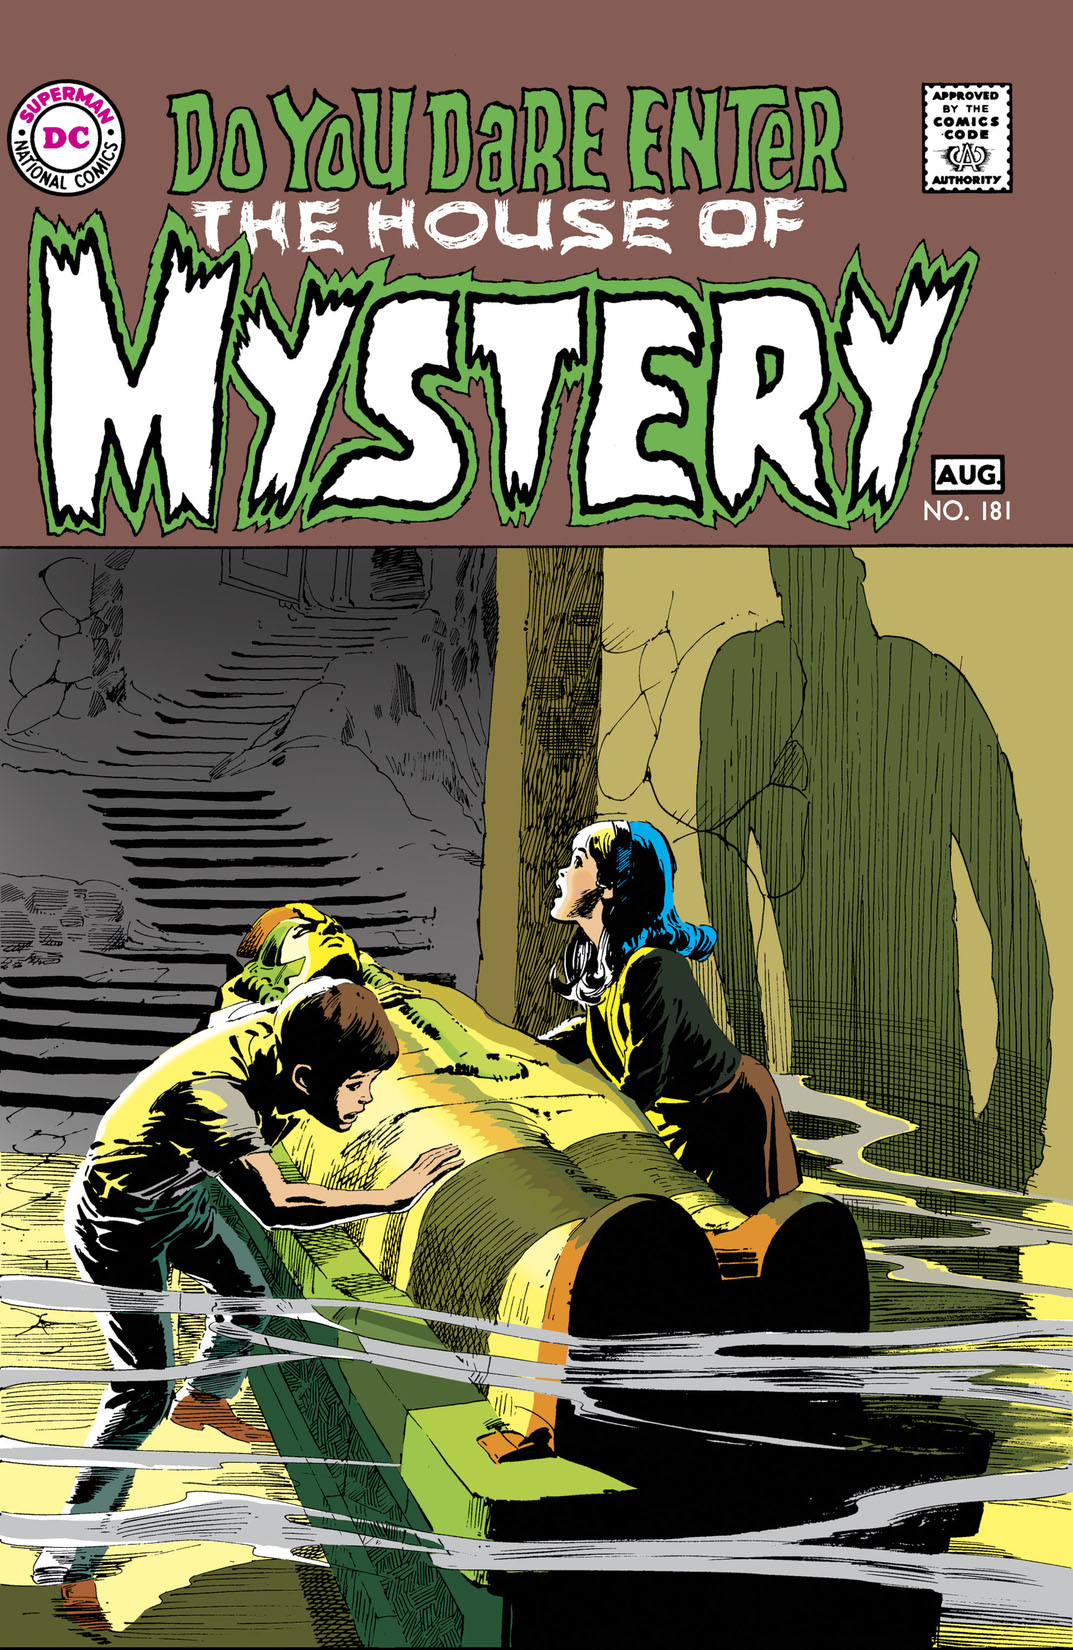 House of Mystery (1951-) #181 preview images